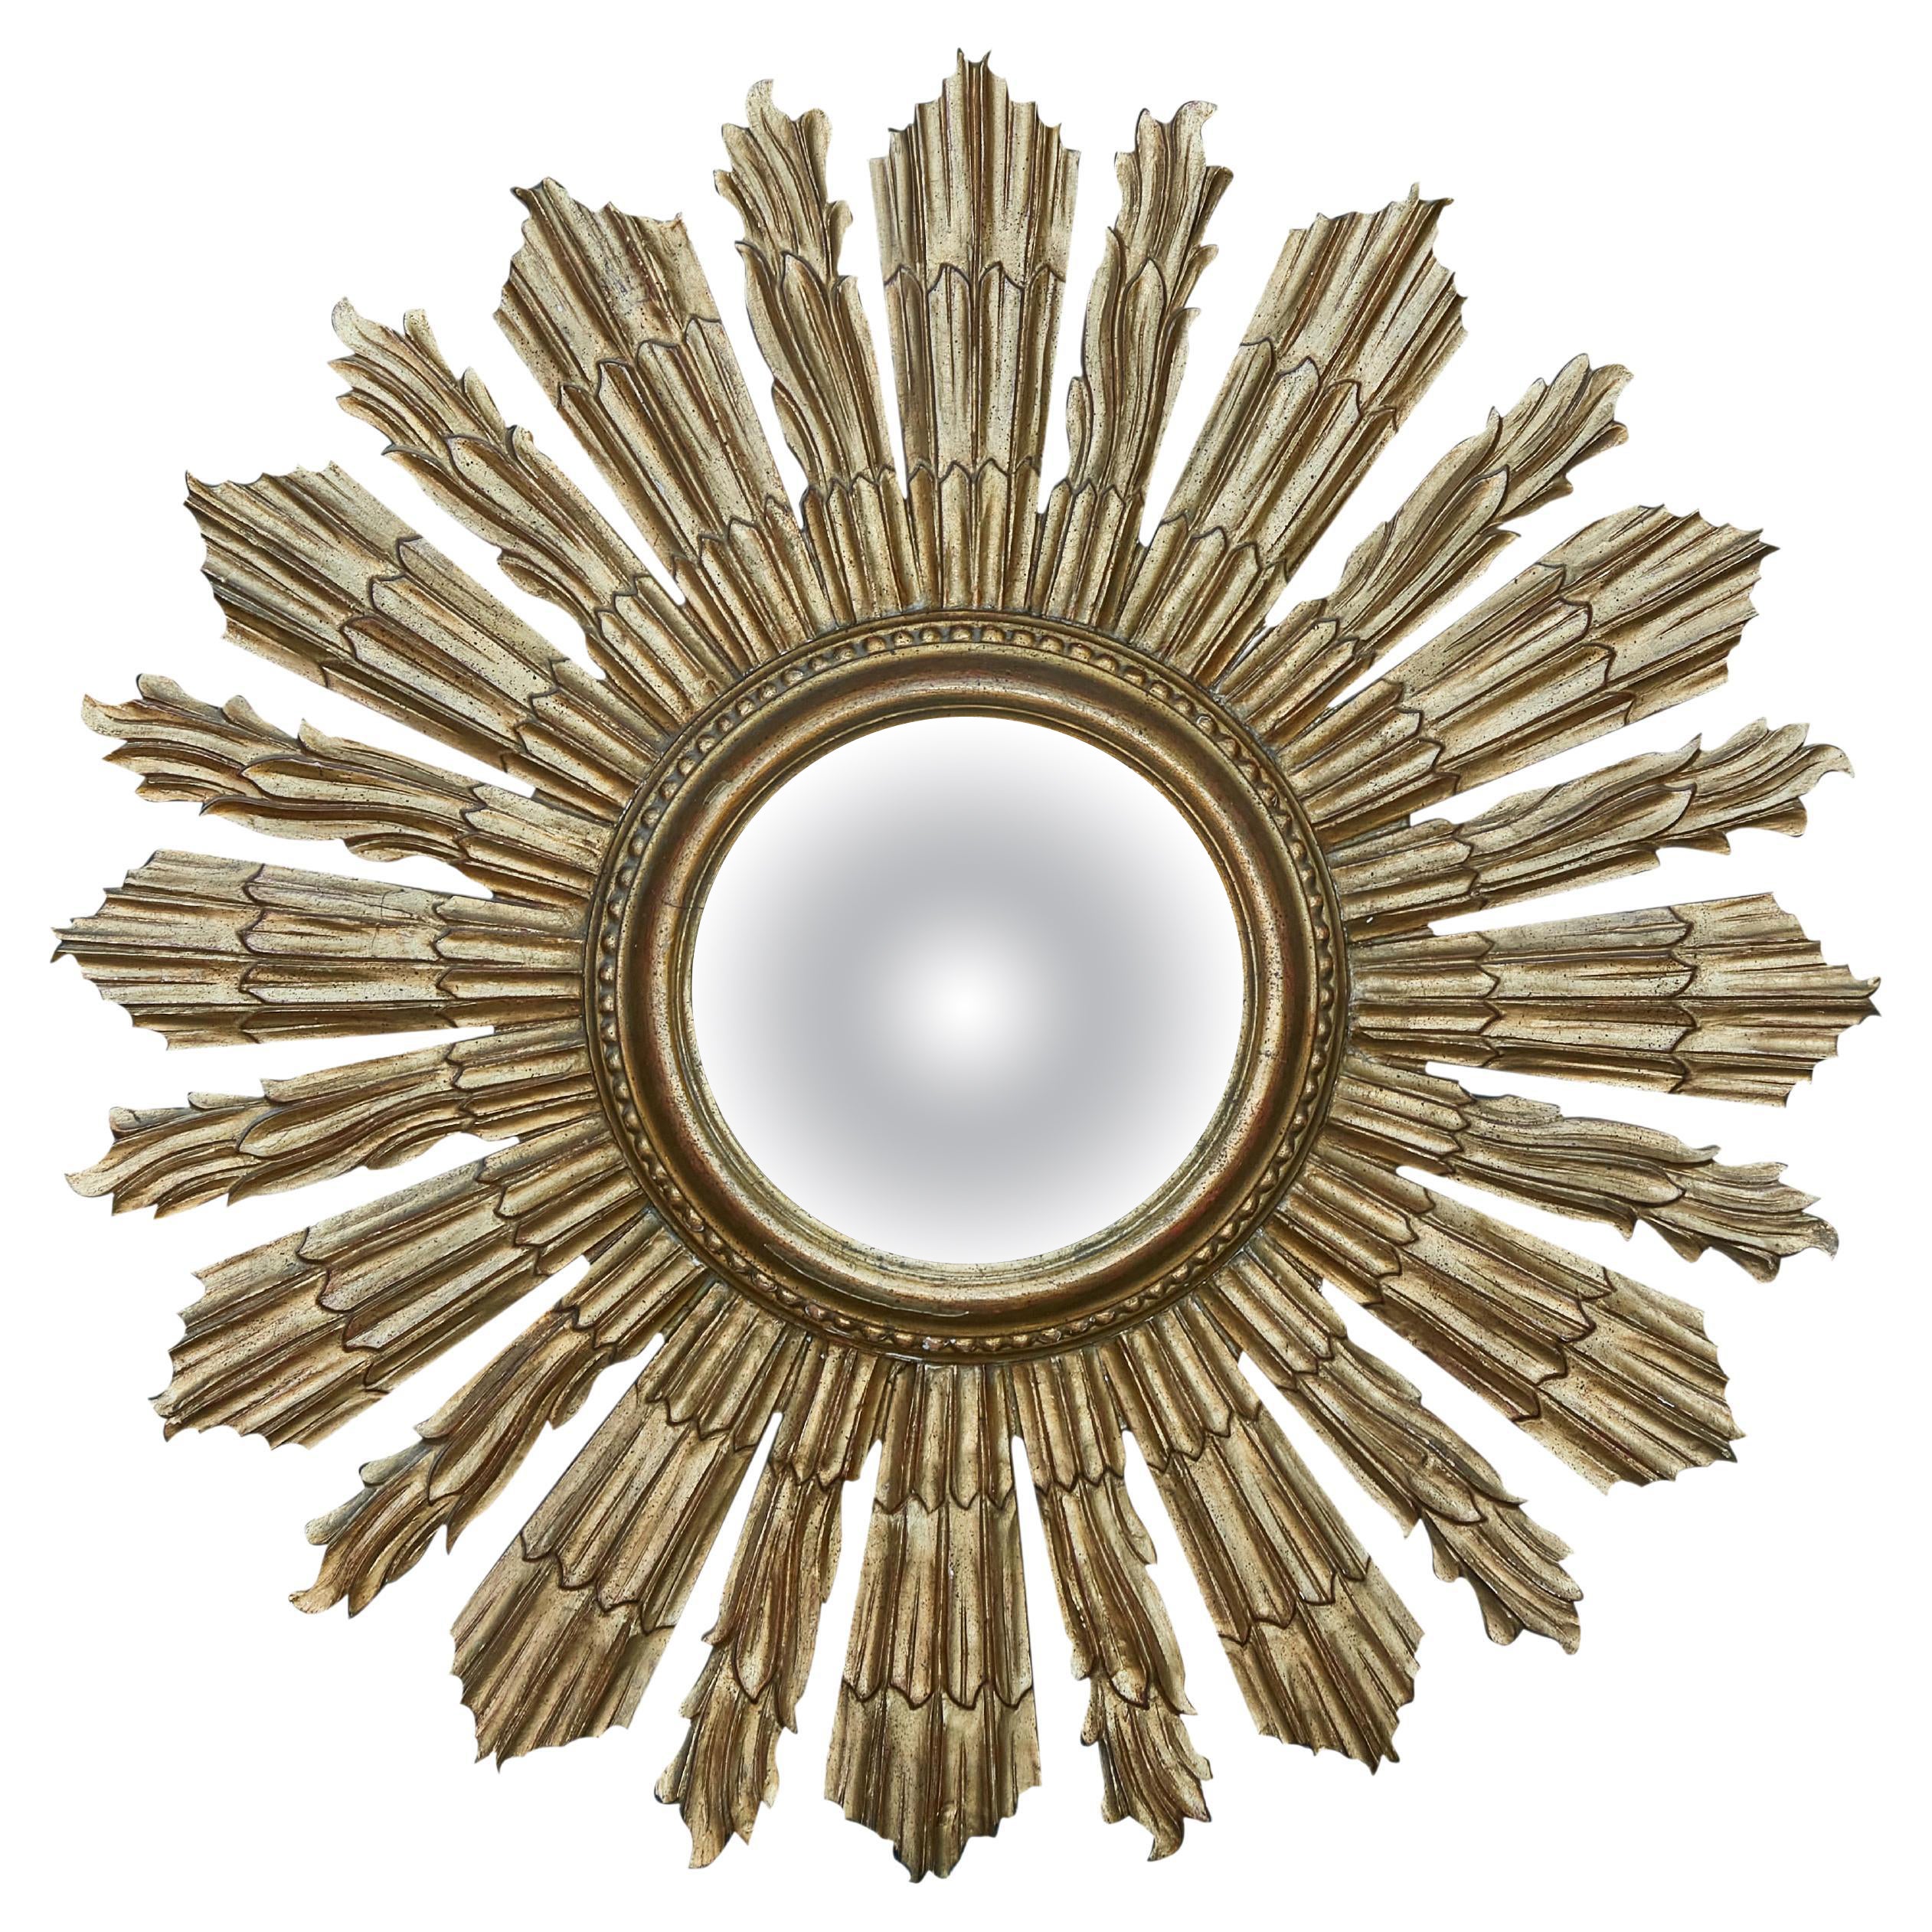 French Midcentury Giltwood Sunburst Mirror with Convex Mirror Plate